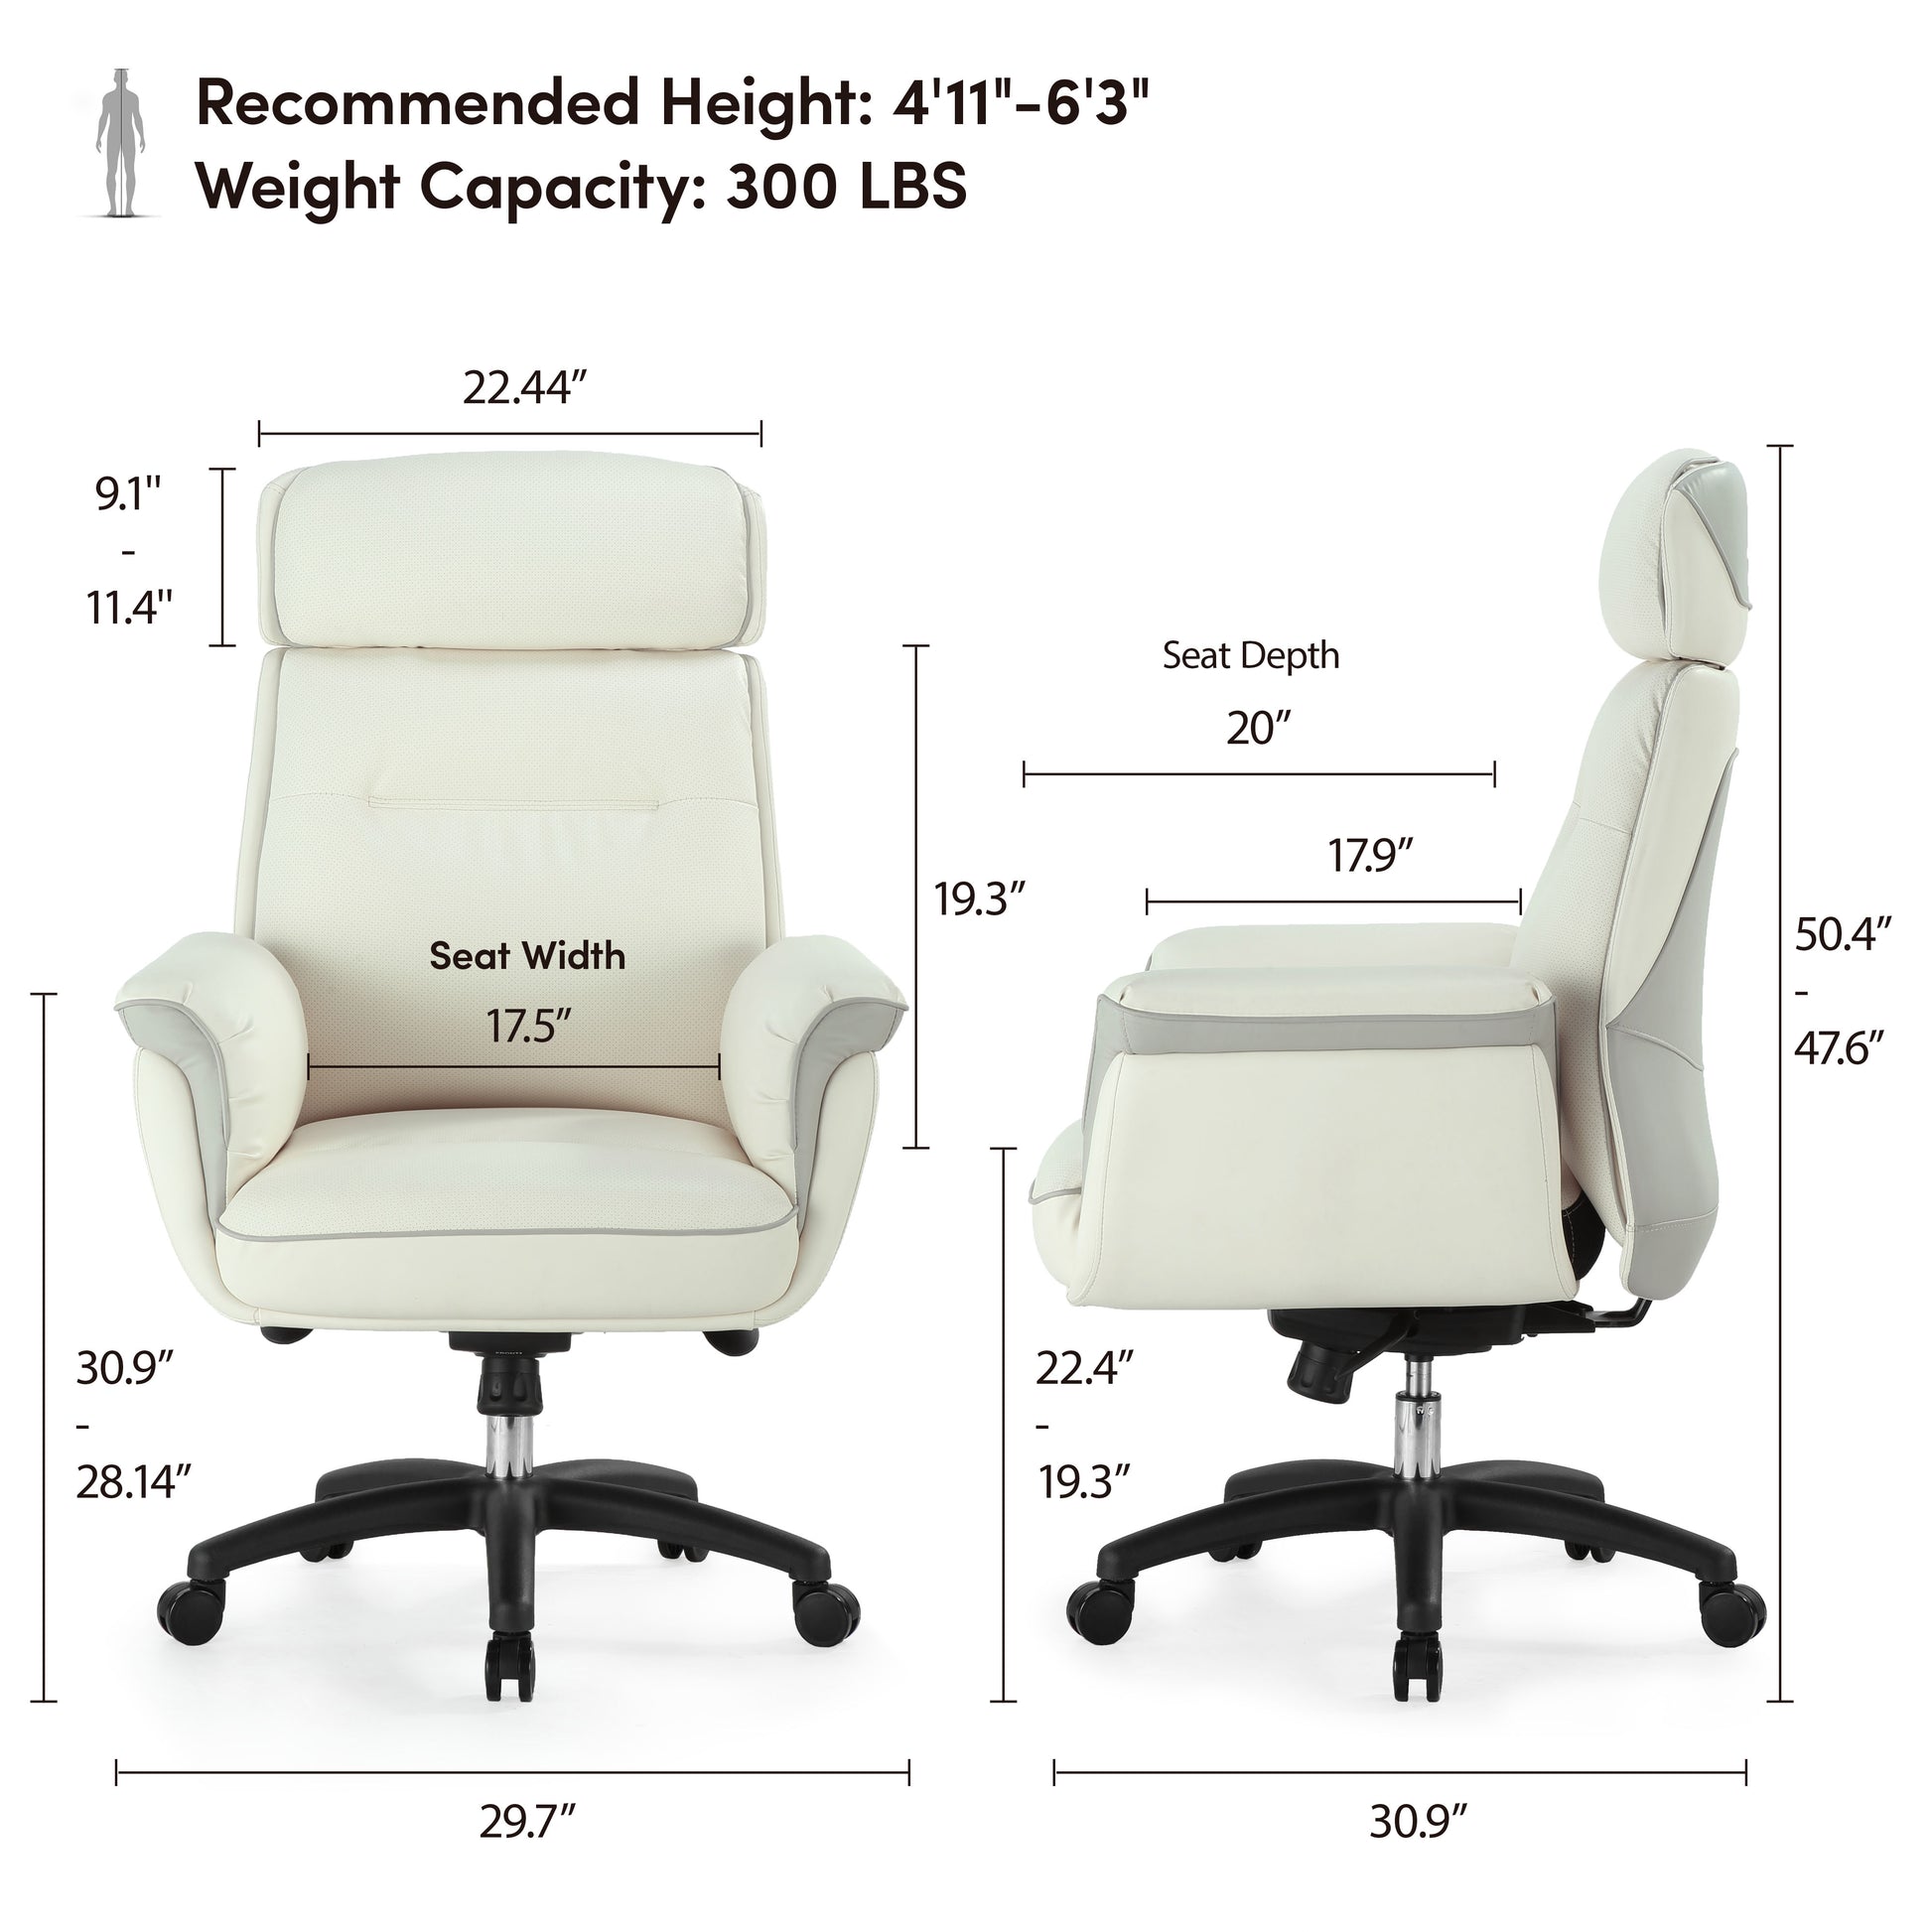 Eureka Royal, comfy leather executive office chair Product Dimensions